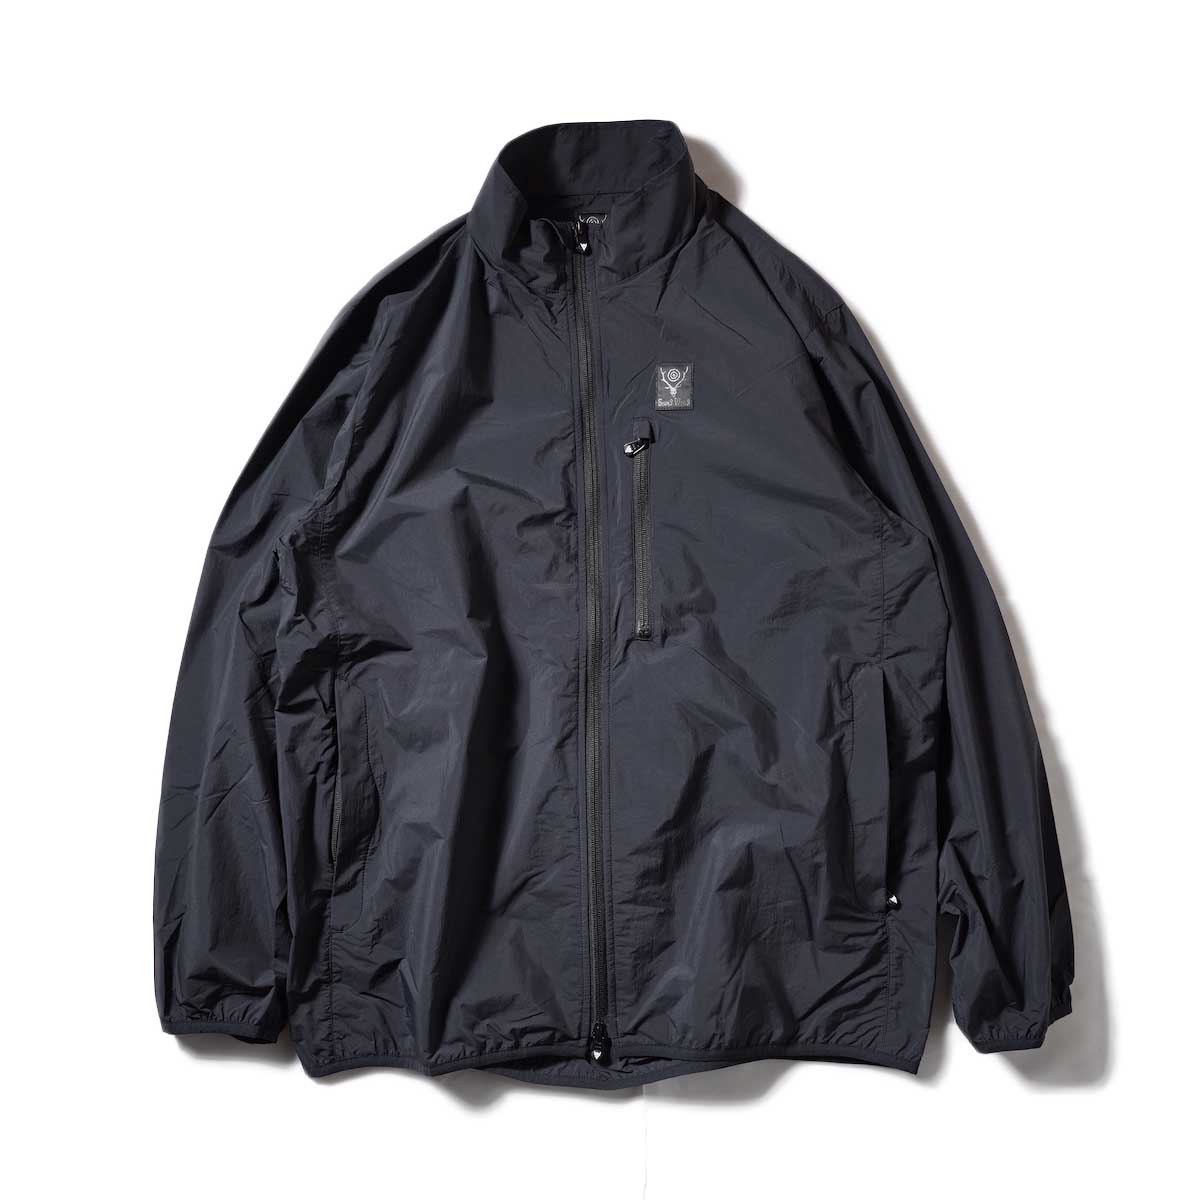 South2 West8 / Packable Jacket (Black)正面